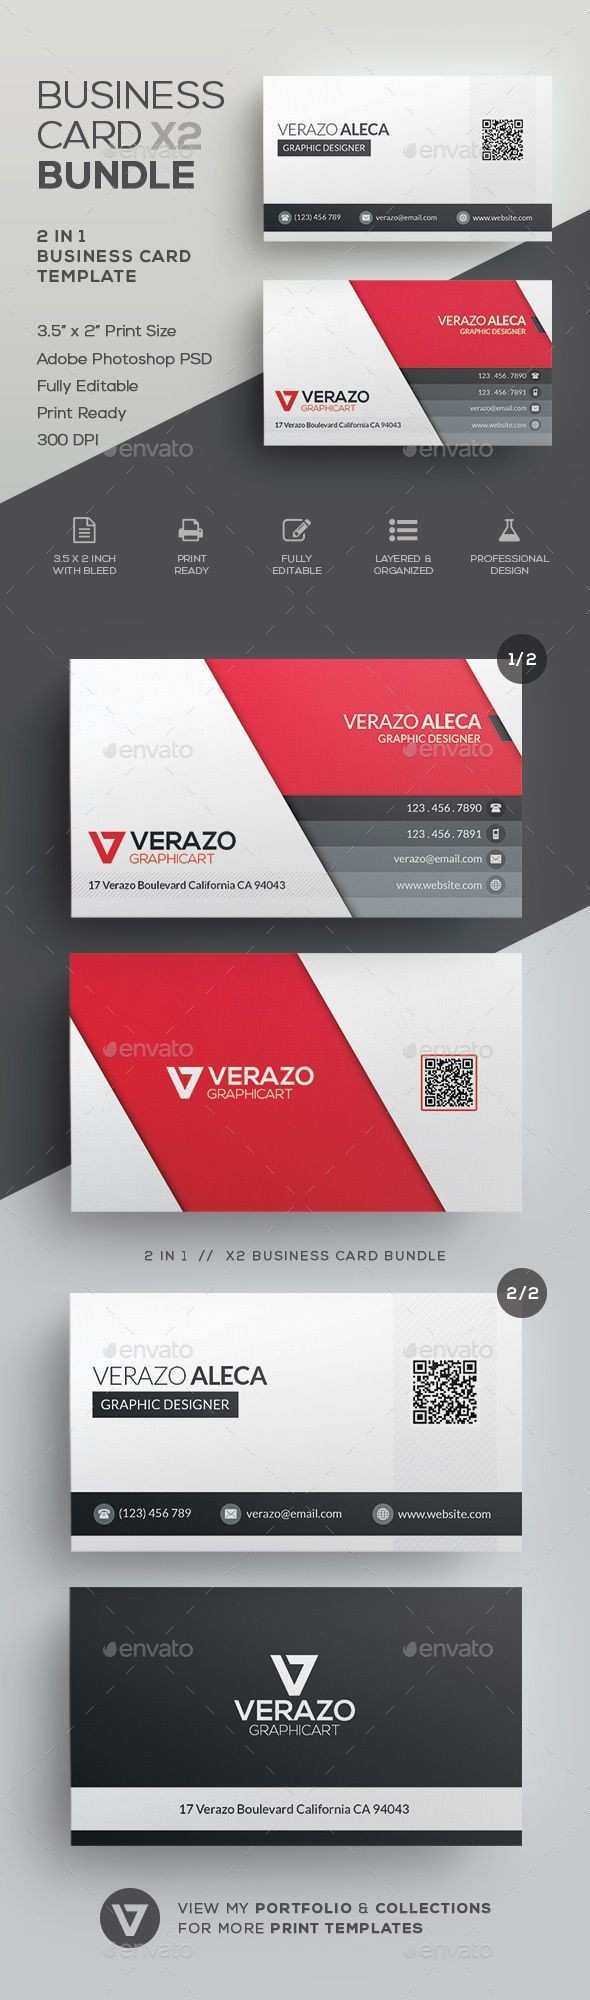 Download Ibm Business Card Template Free – Cards Design Intended For Ibm Business Card Template